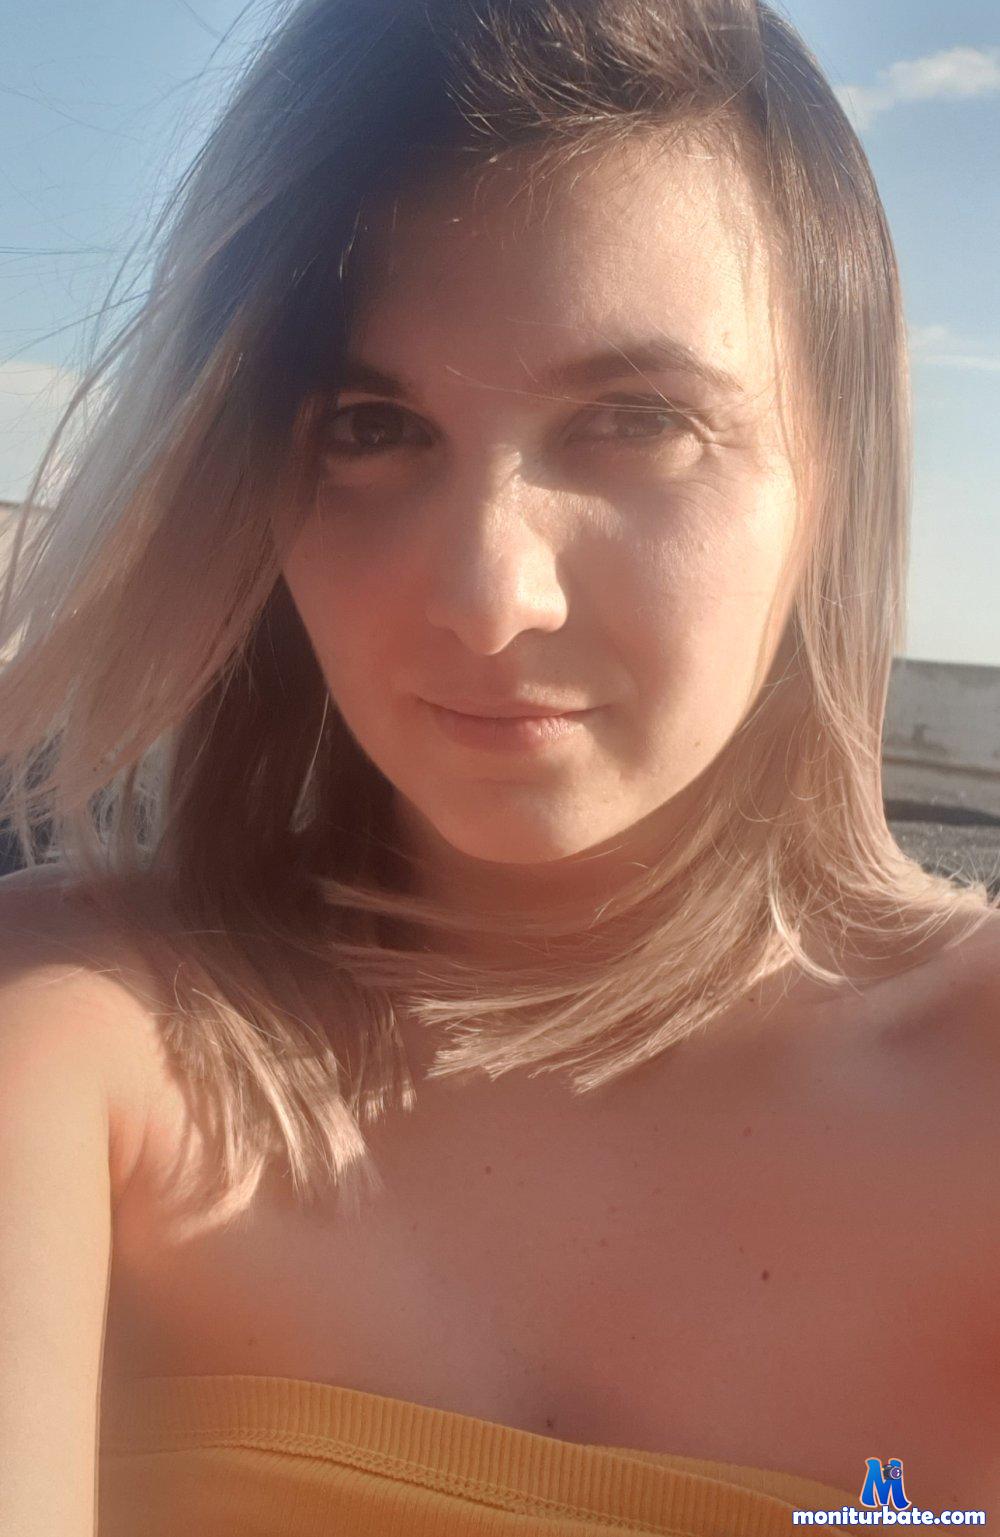 MissEmmaa Stripchat performer girls age Young hair Color Blonde specifics Big Tits ethnicity White do Topless hair Color Black body Type Medium subculture Romantic private Price Sixteen To Twenty Four small Audience auto Tag New auto Tag P2 P do Oil Show